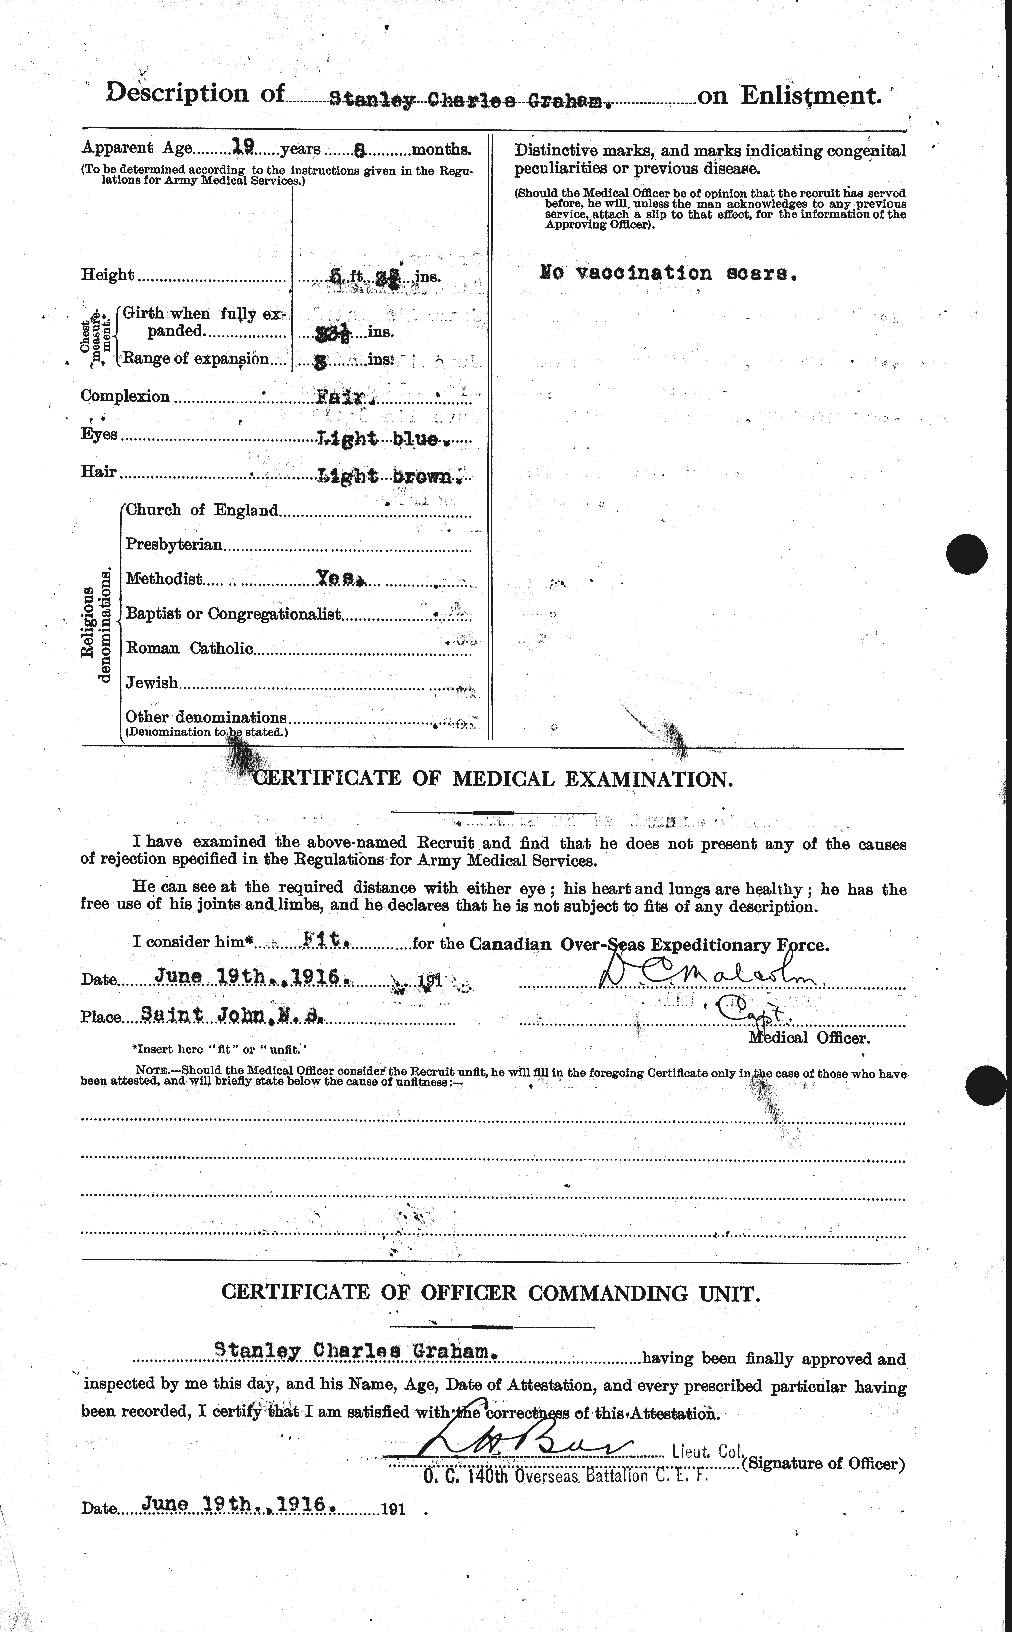 Personnel Records of the First World War - CEF 359467b